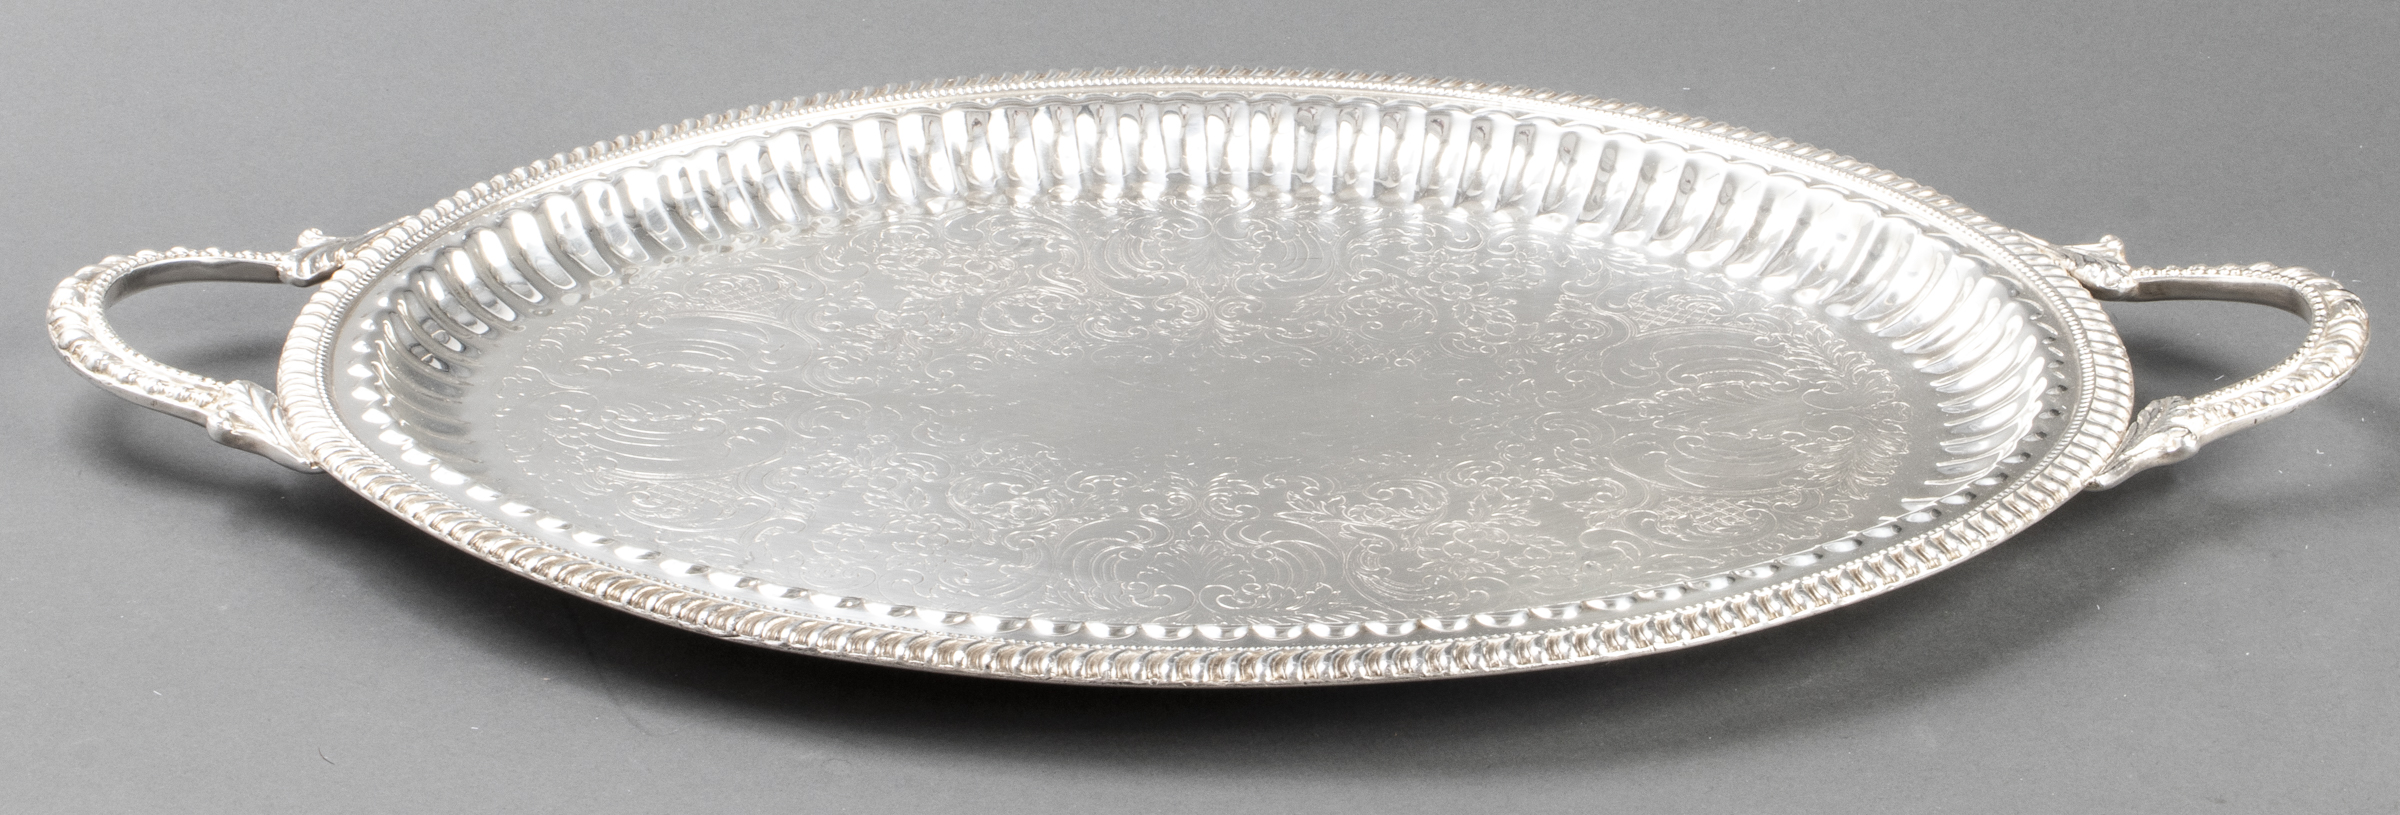 SILVERPLATE SERVING TRAY WITH ETCHED